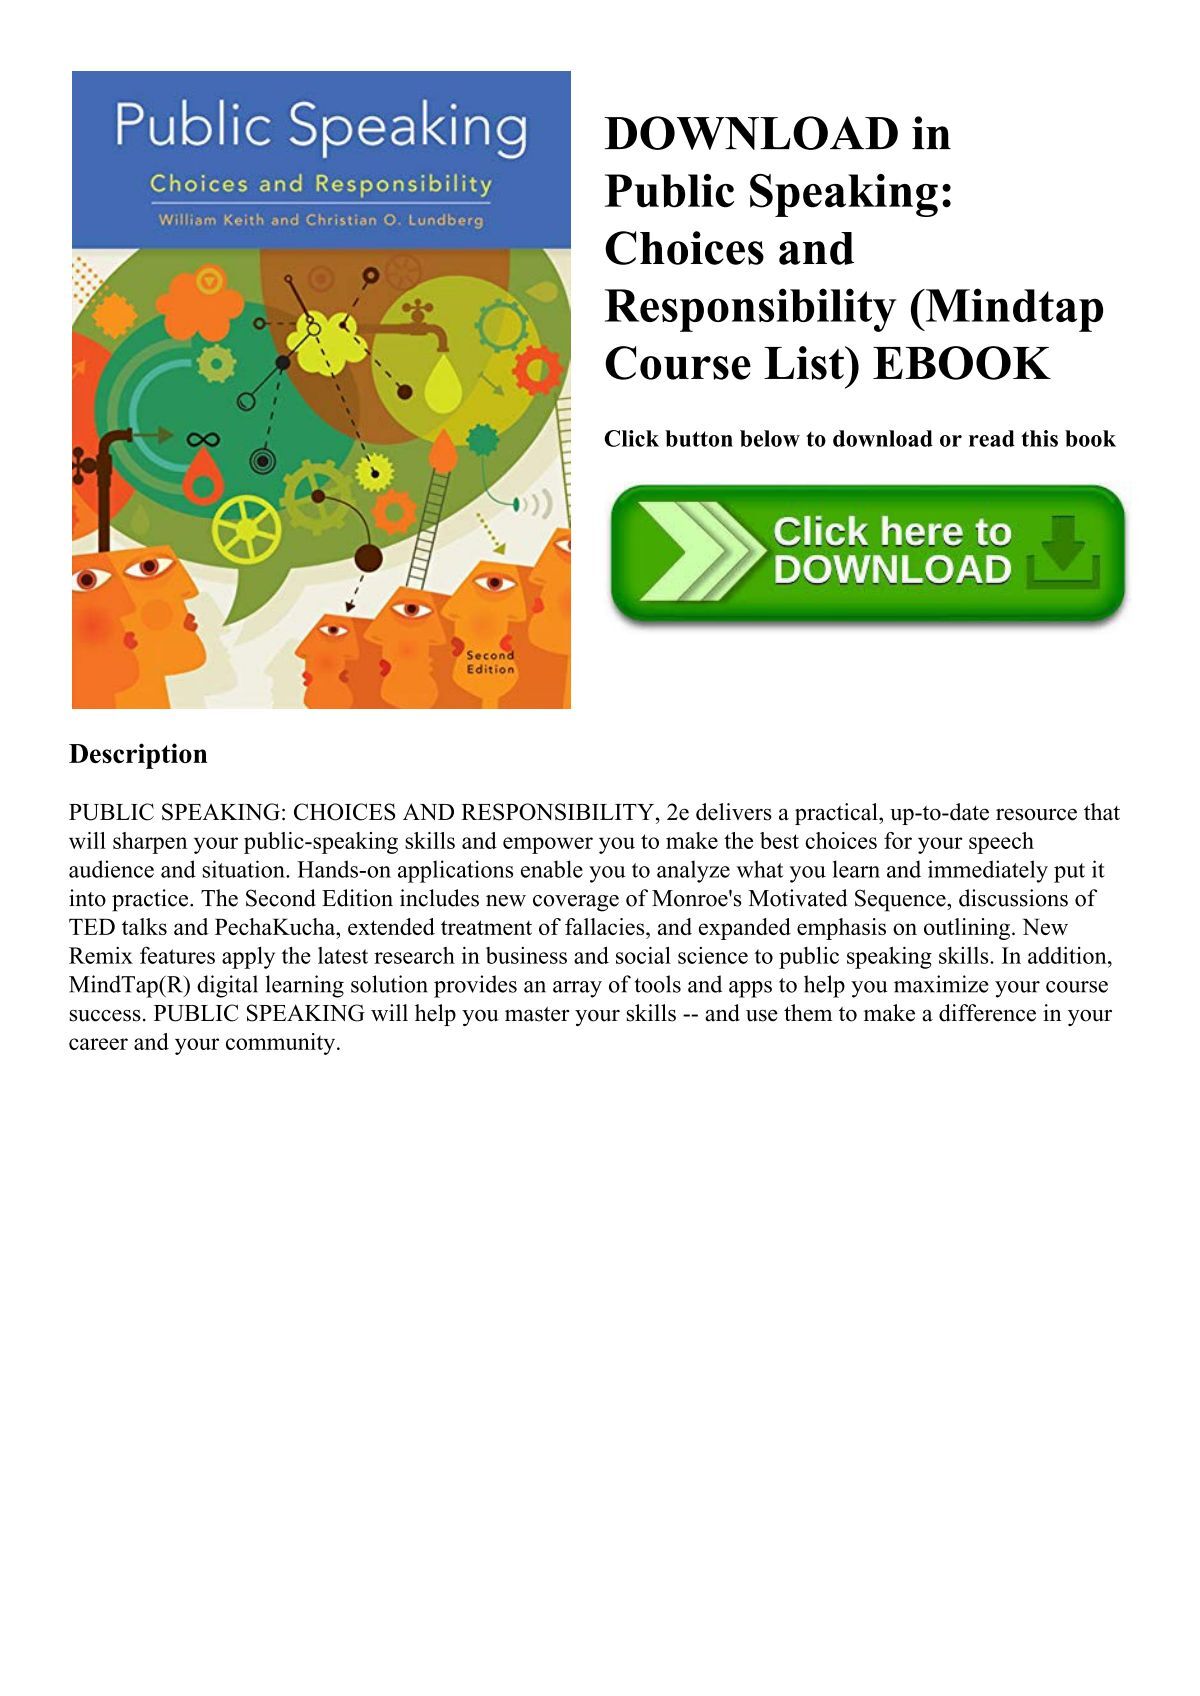 DOWNLOAD in PDF Public Speaking Choices and Responsibility